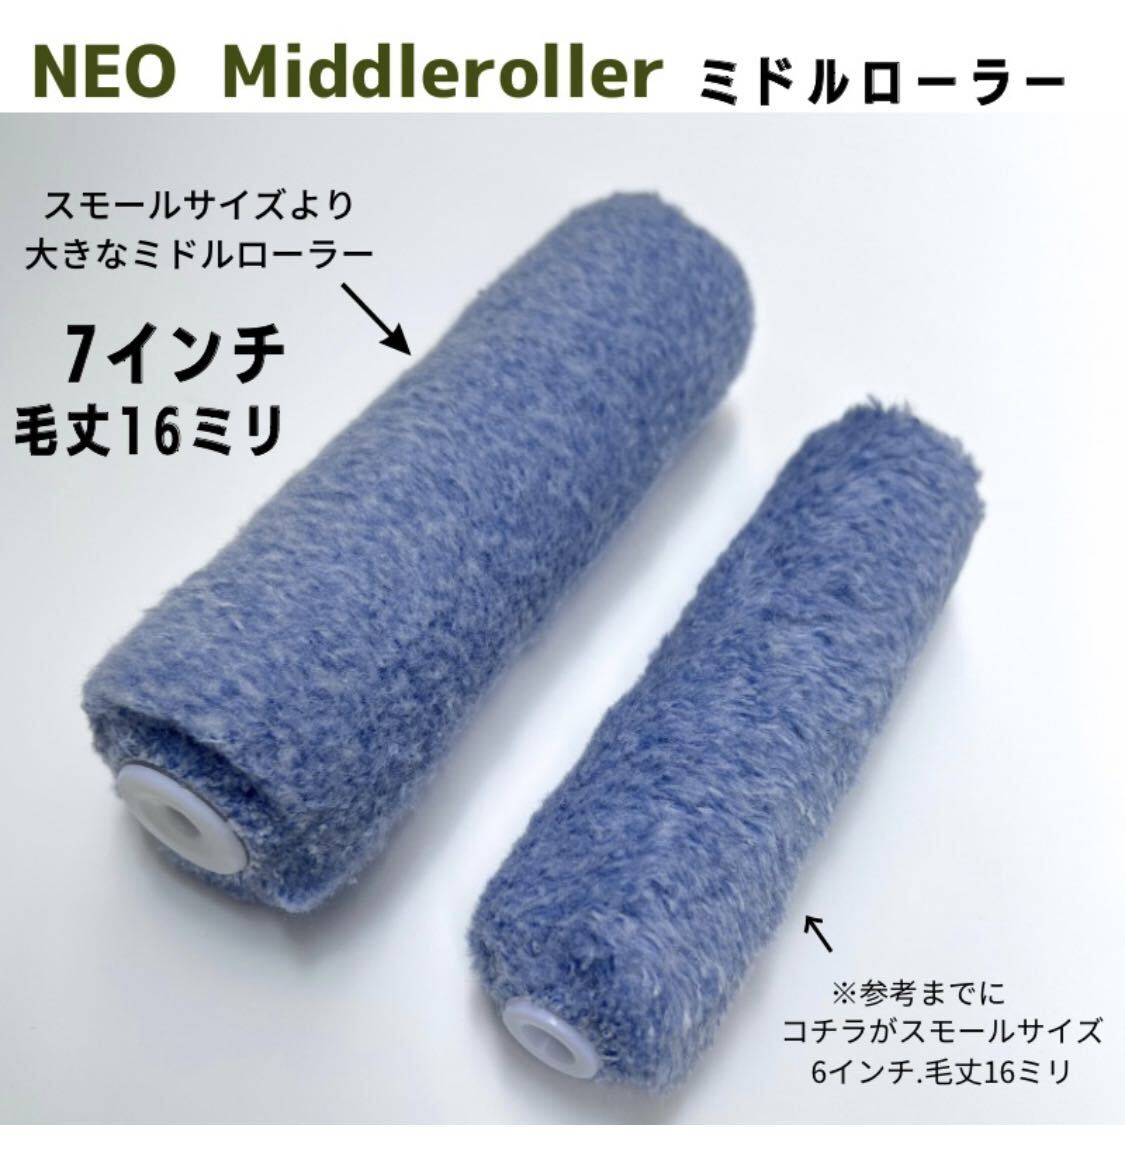  prompt decision! stock one .!SALE! NEO middle roller 7 -inch * wool height 16mm 10 pcs set 